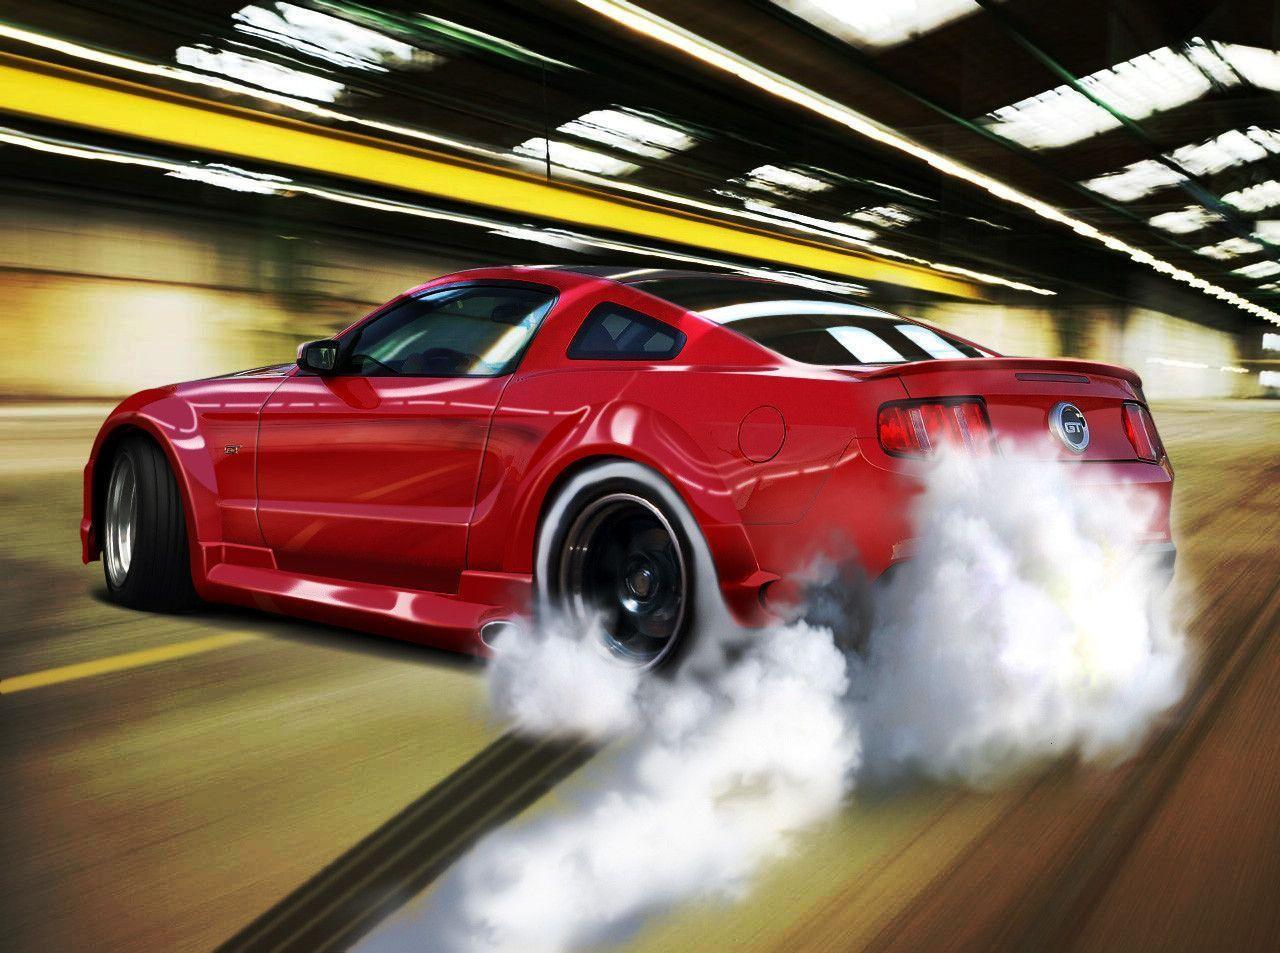 Ford Mustang GT 2010 Exclusive HD Wallpaper #